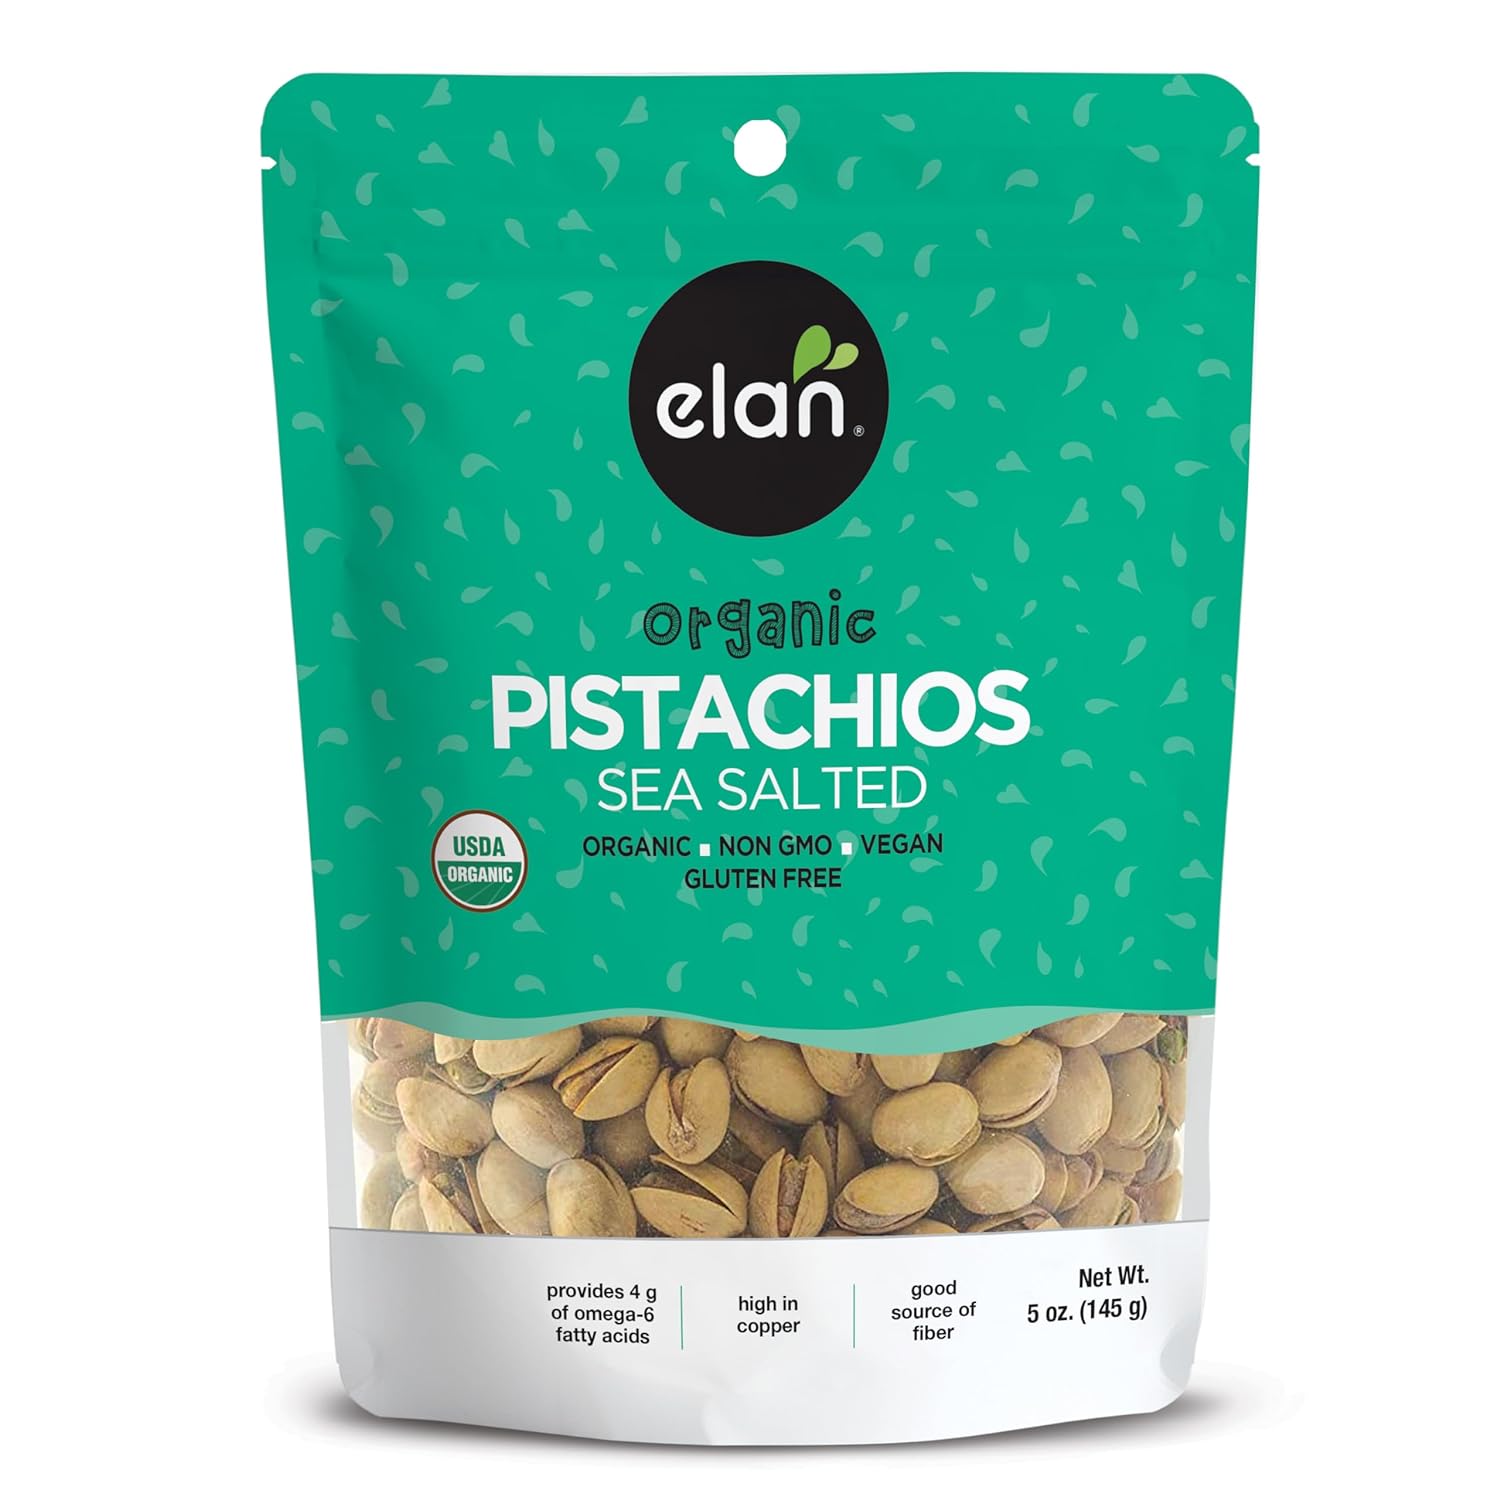 Elan Organic Sea Salted Pistachios, 5.1 oz, In Shell, Salted with Sea Salt, Lightly Roasted, Naturally Open, Non-GMO, Vegan, Gluten-Free, Kosher, Healthy Snacks